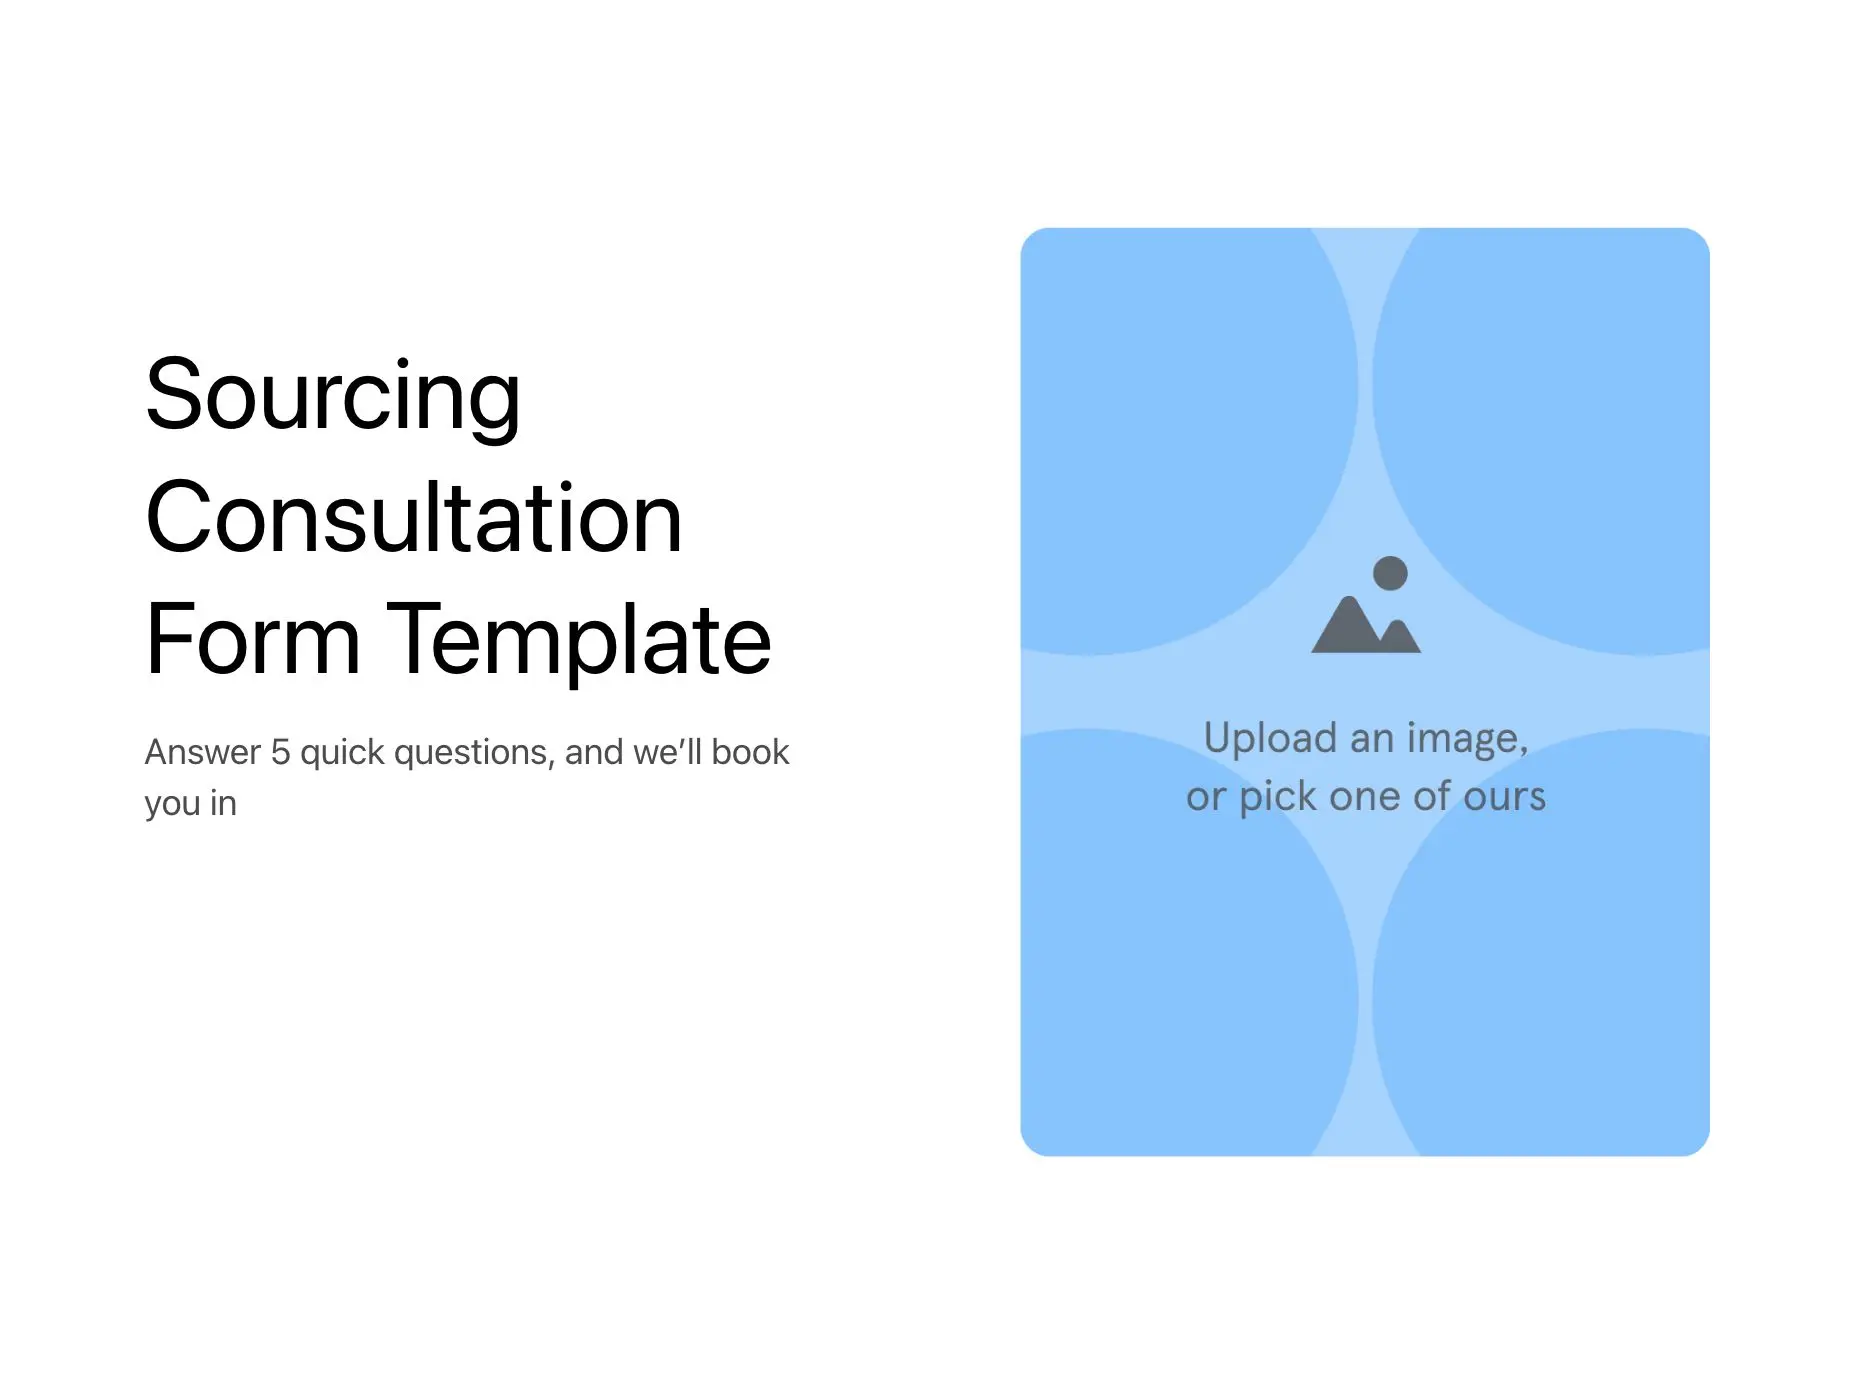 Sourcing Consultation Form Template Hero